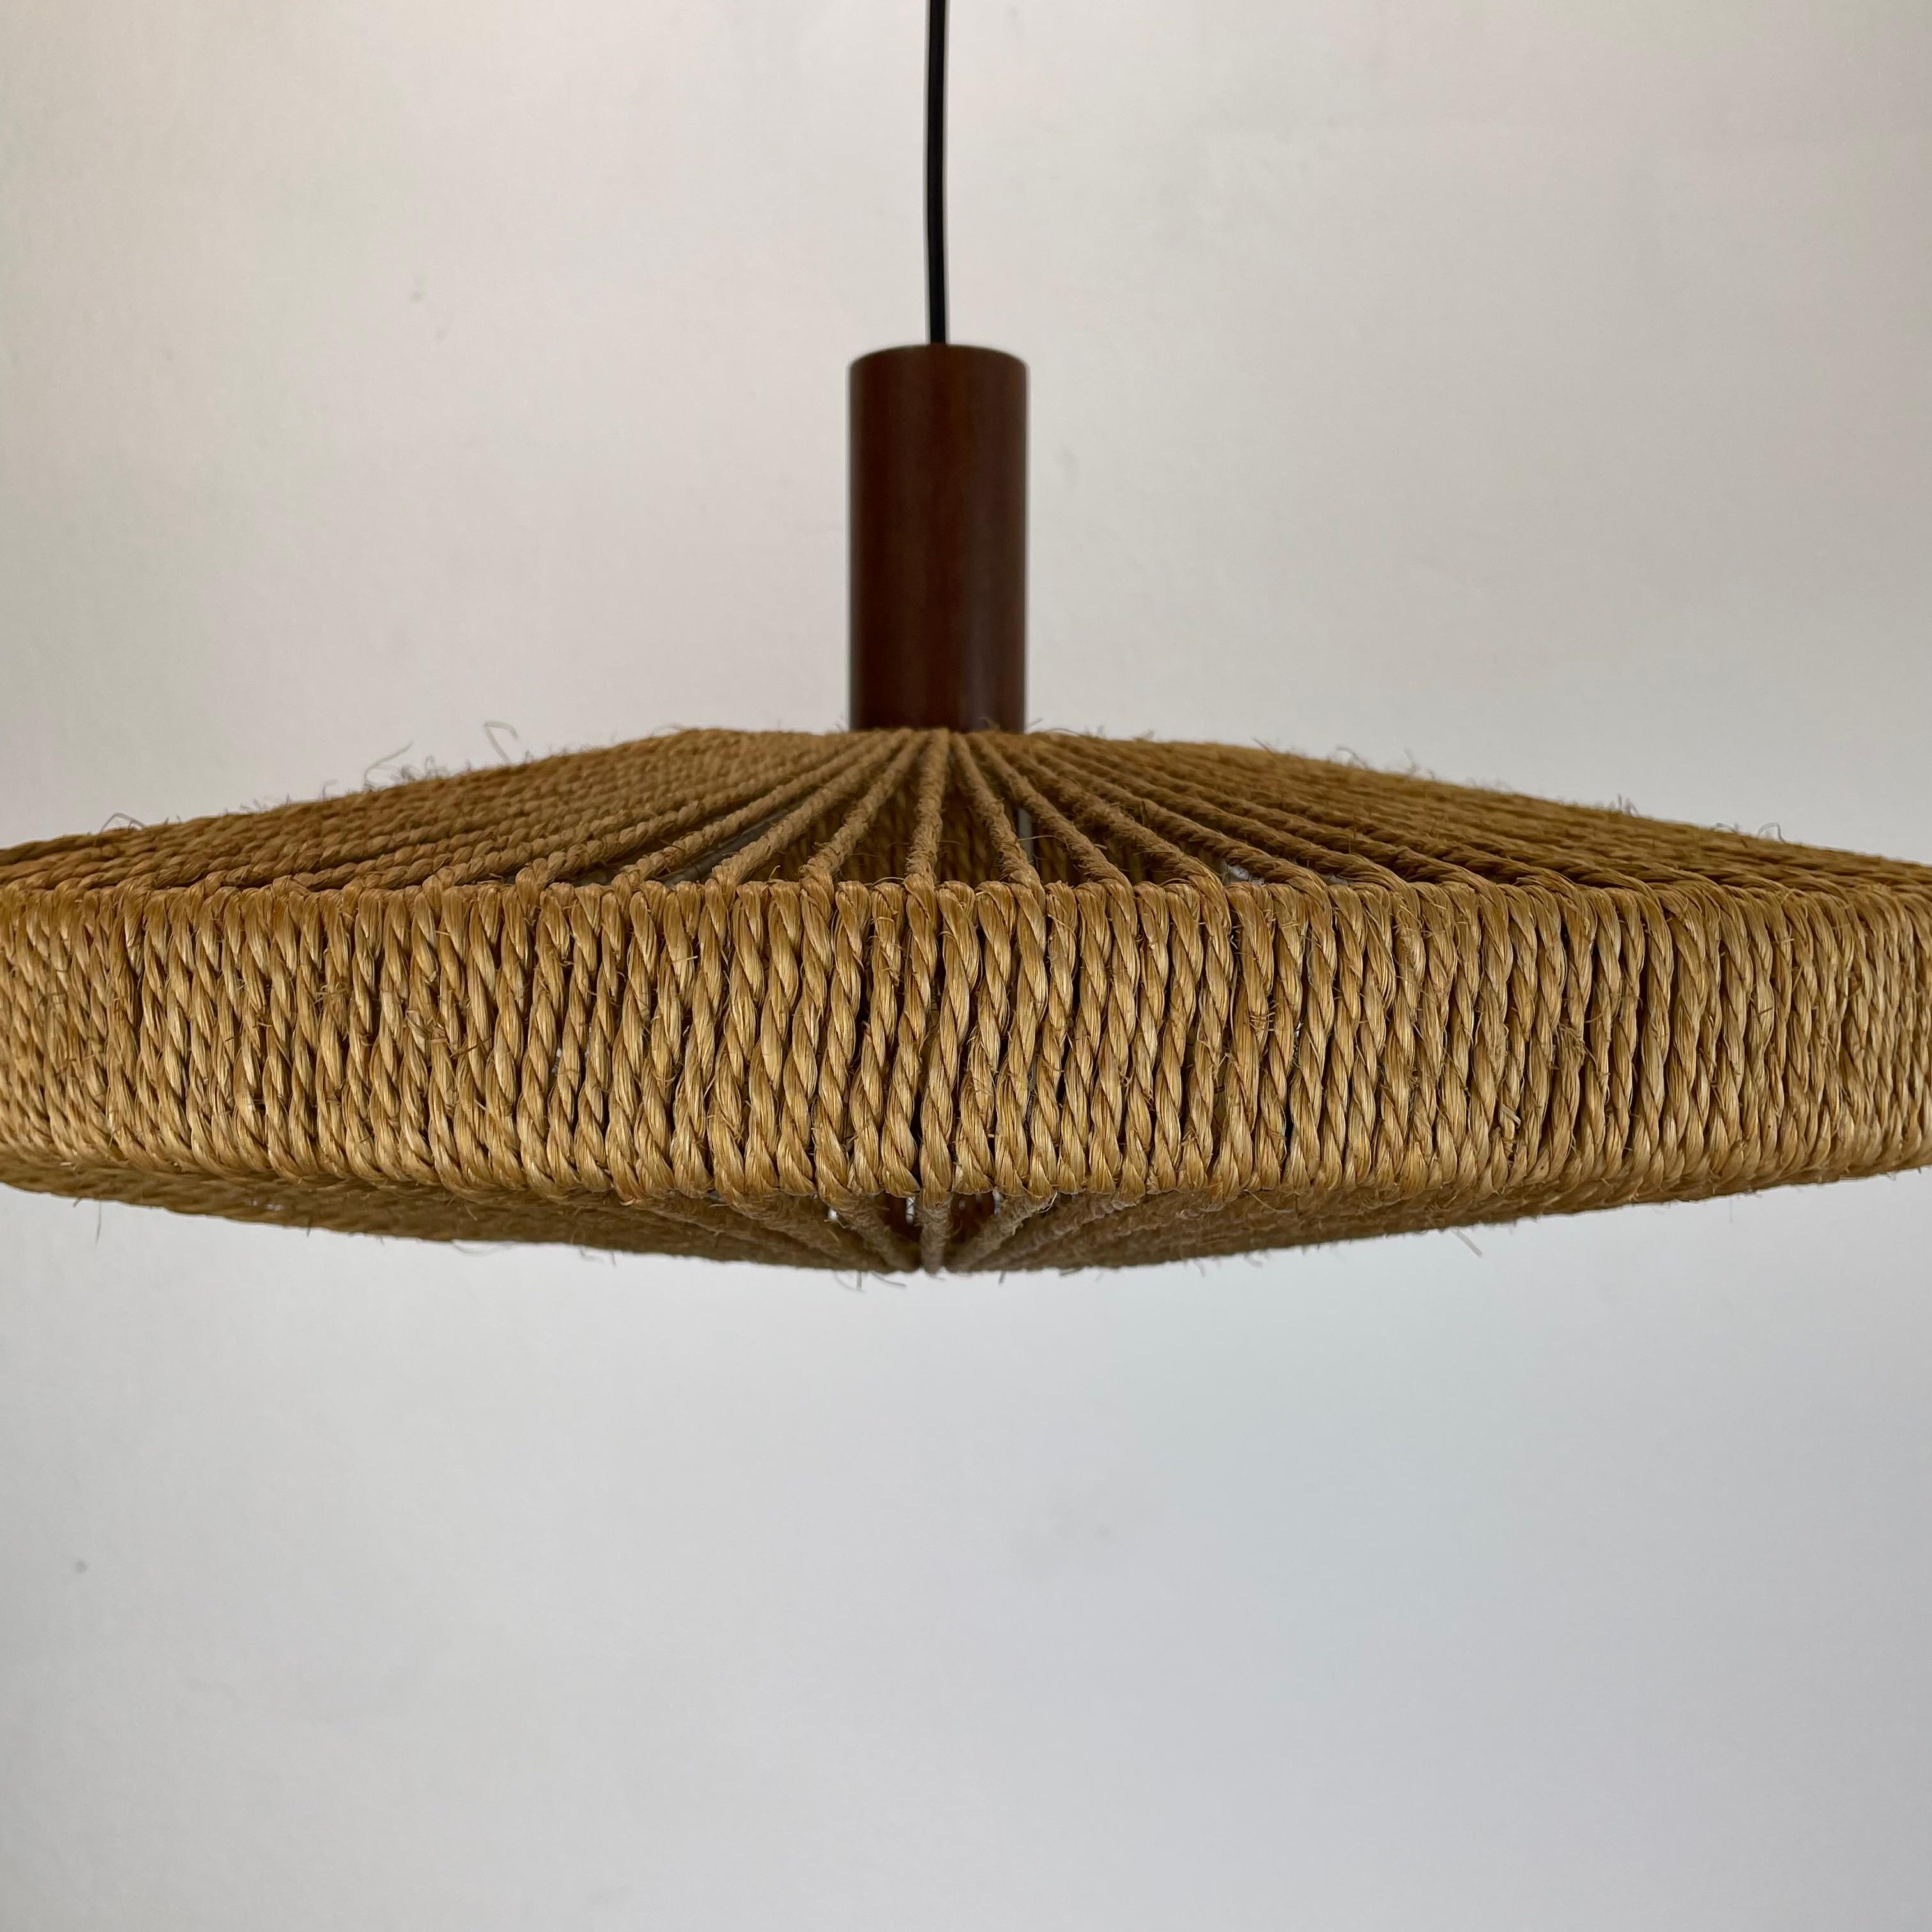 56cm Organic Sisal and Teak Ufo Hanging Light Made by Temde Lights Germany 1960s For Sale 8